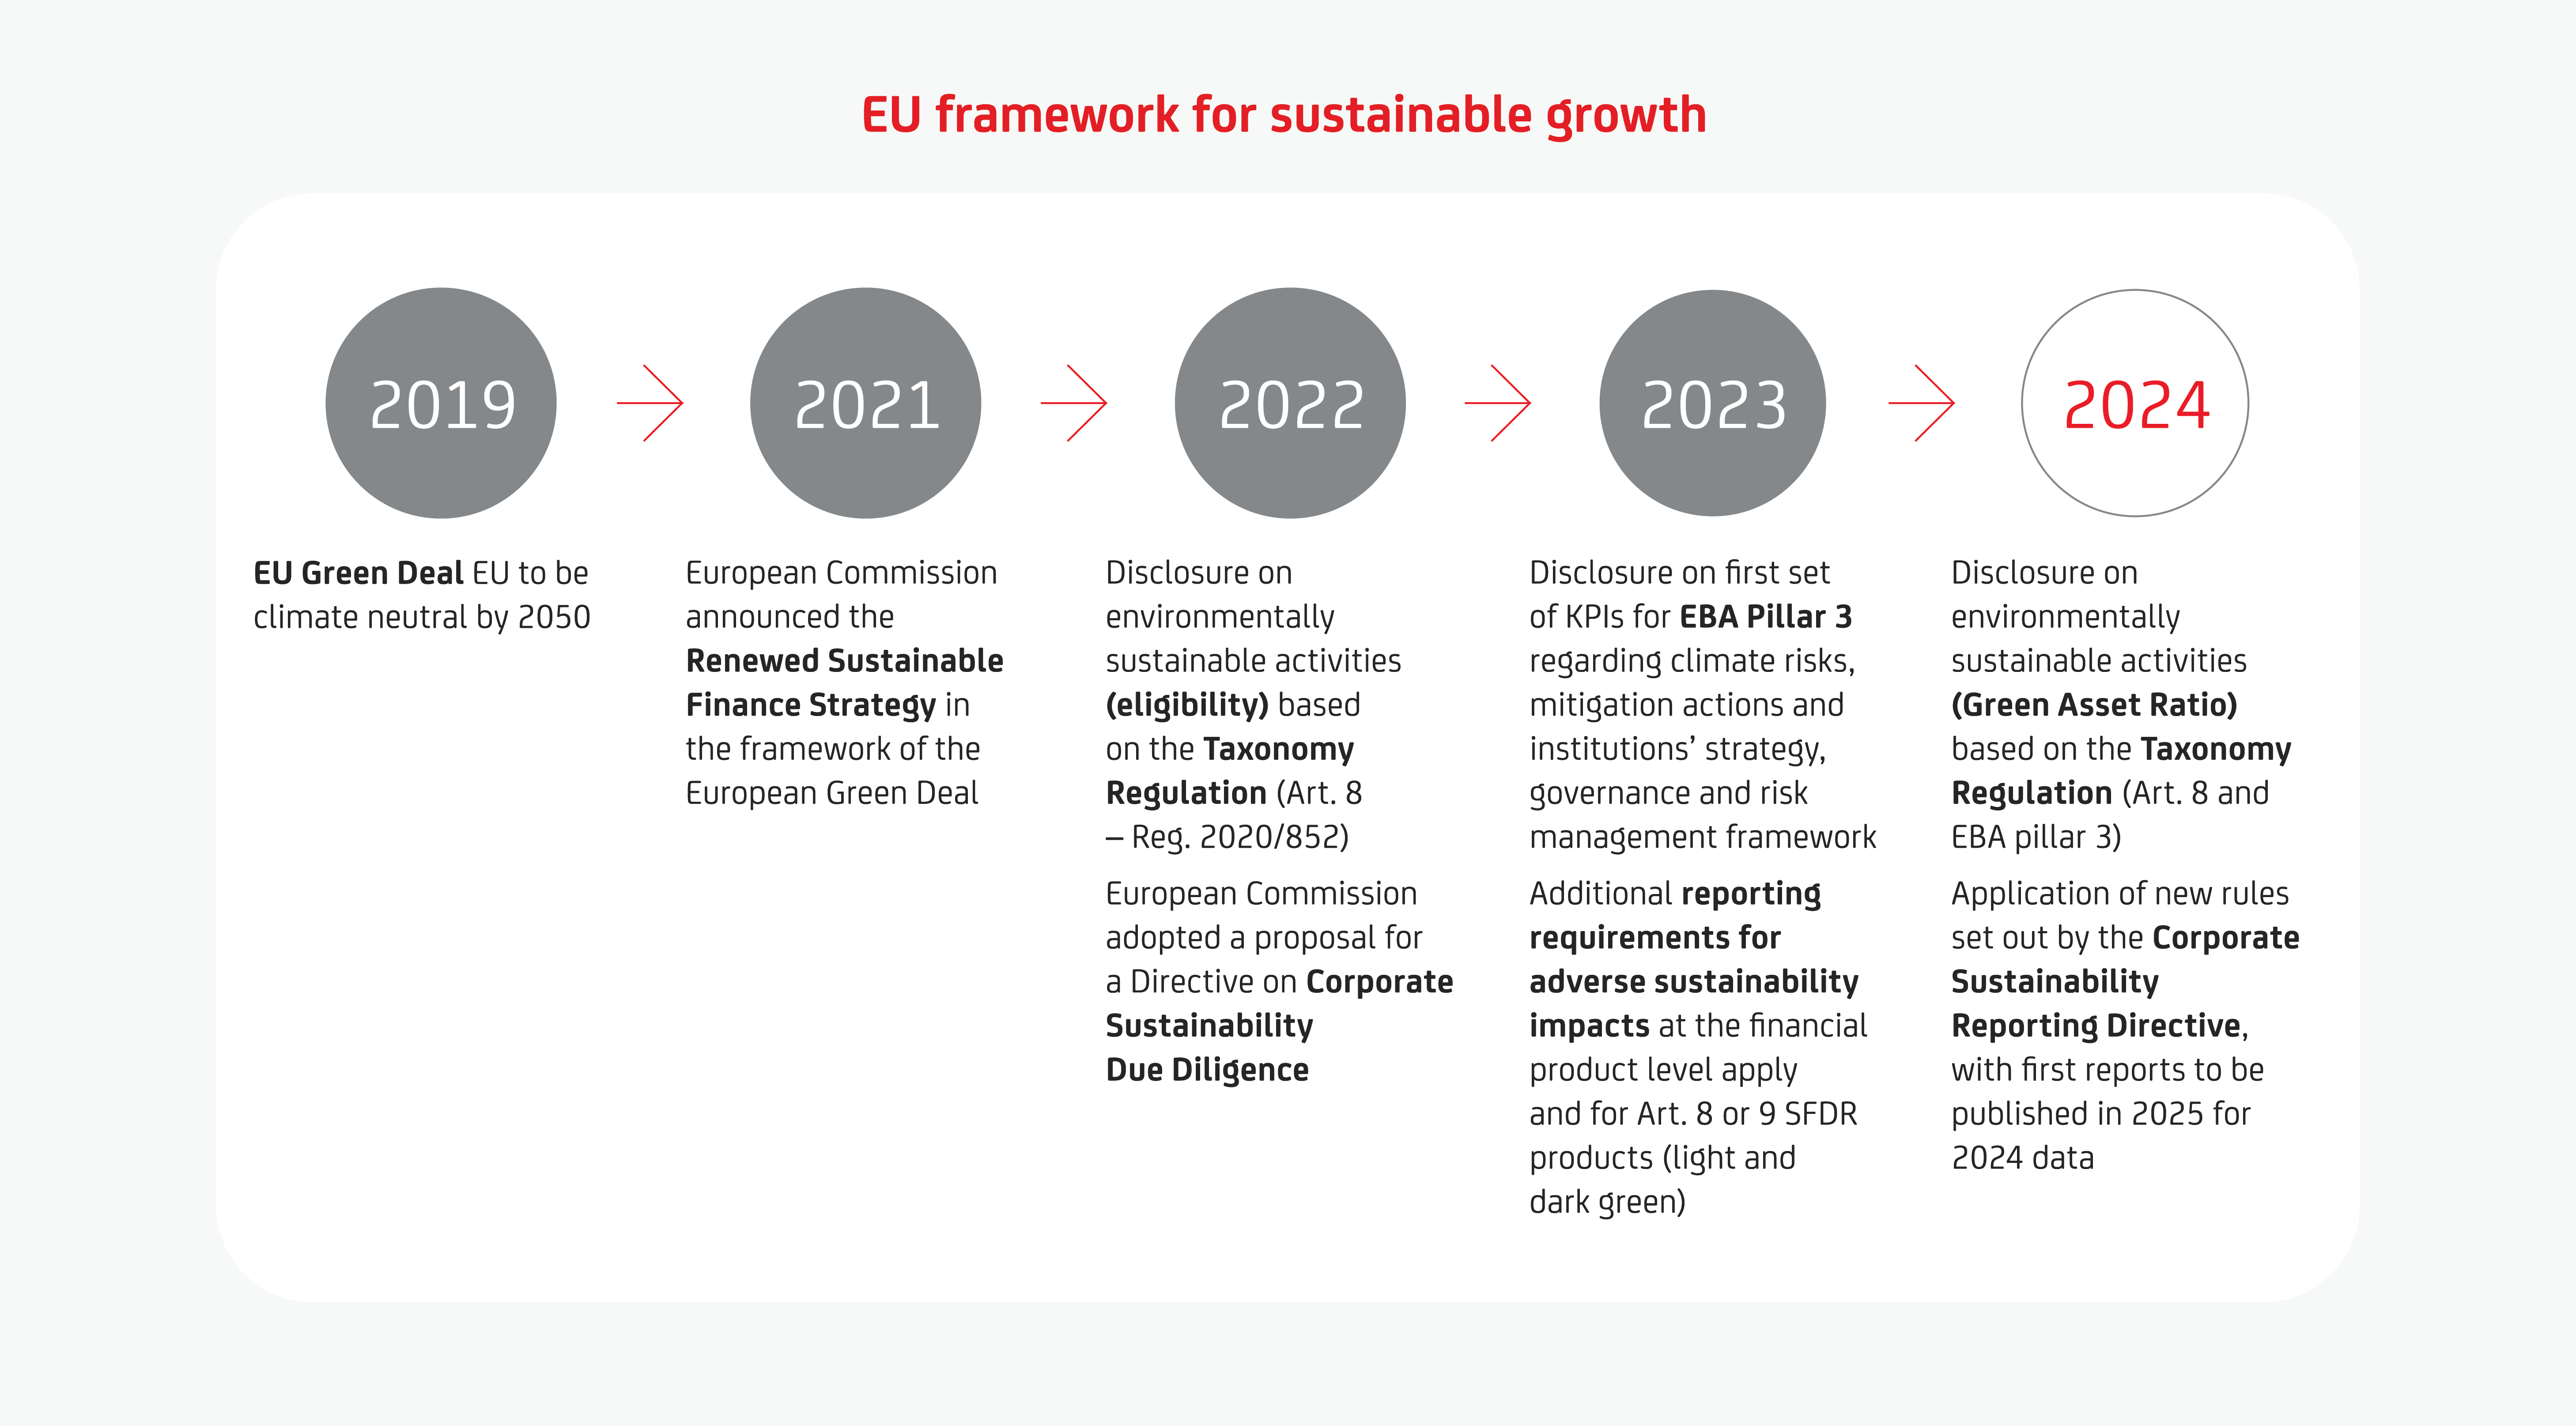 Illustration showing EU framework for sustainable growth